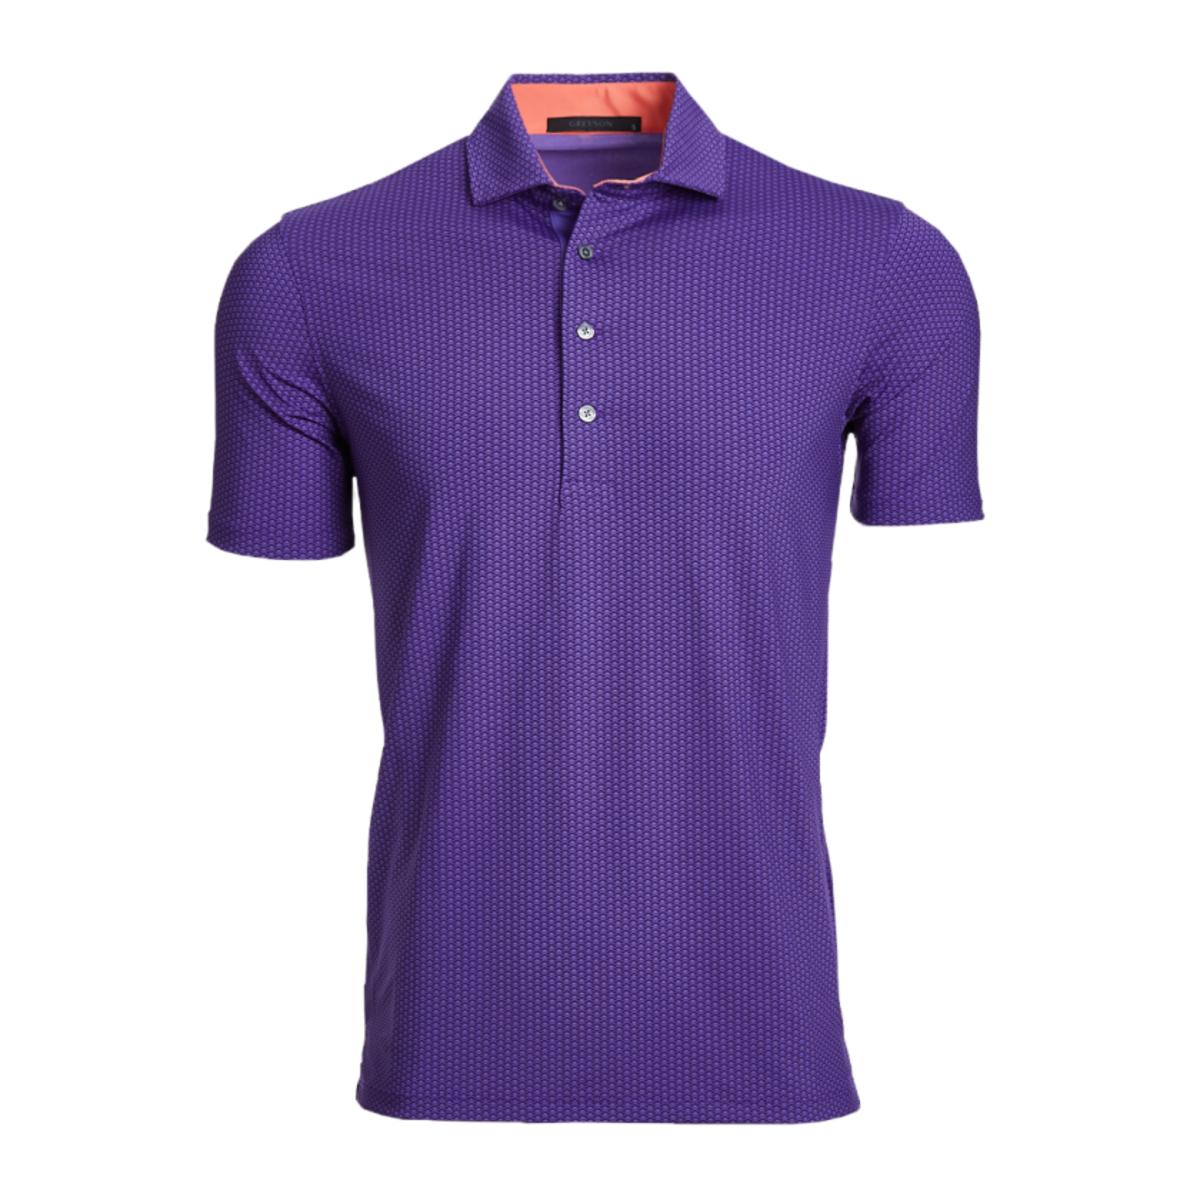 Greyson Clothiers' Koda Polo in the Rush colorway. 